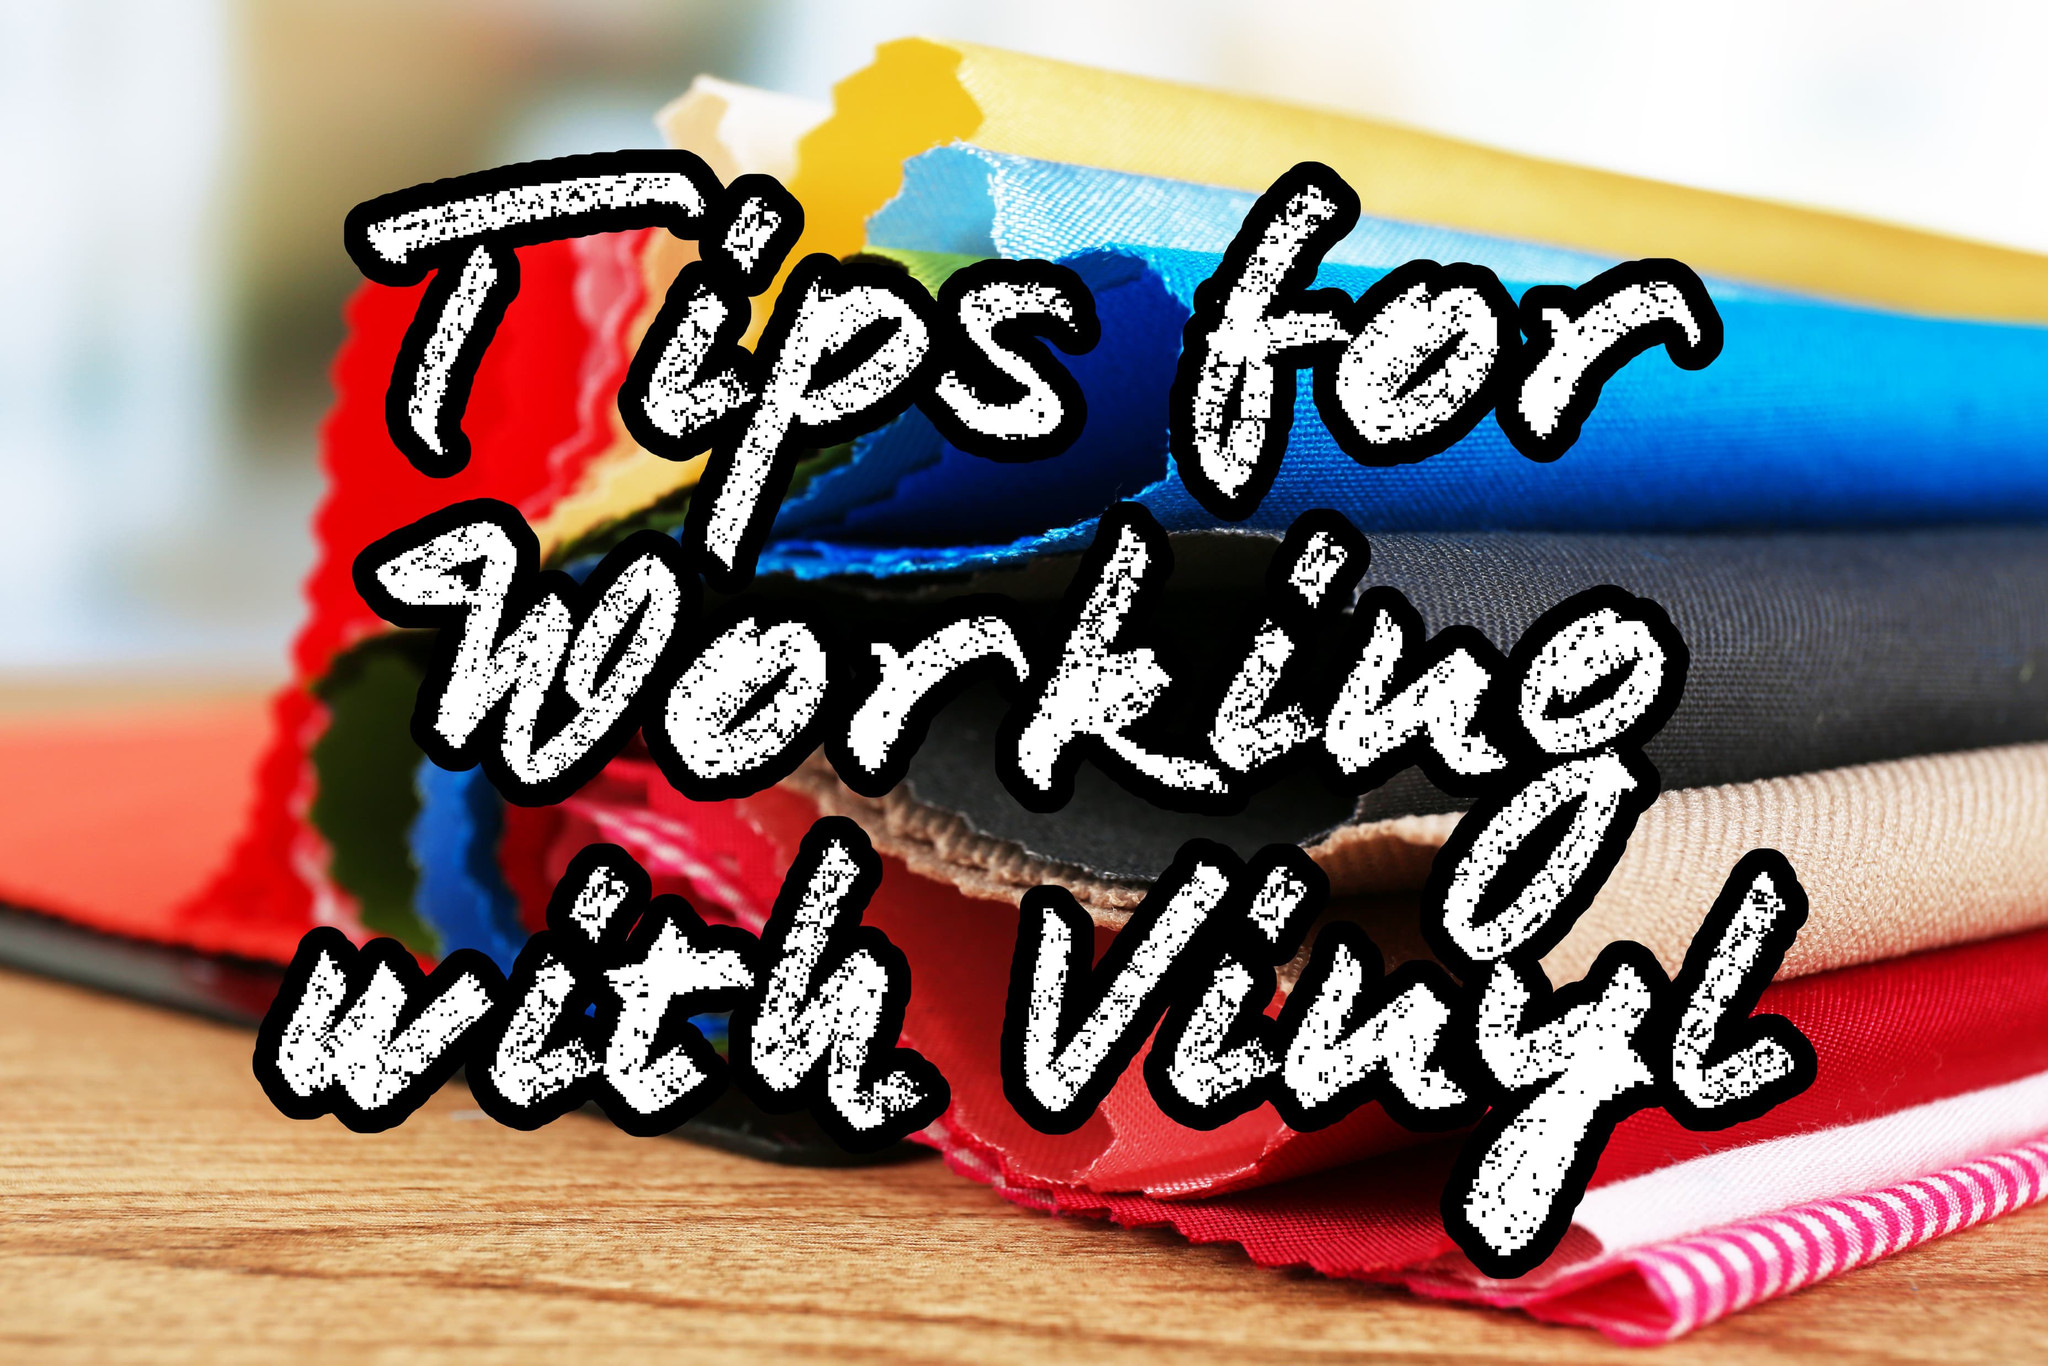 Tips for Sewing with Vinyl